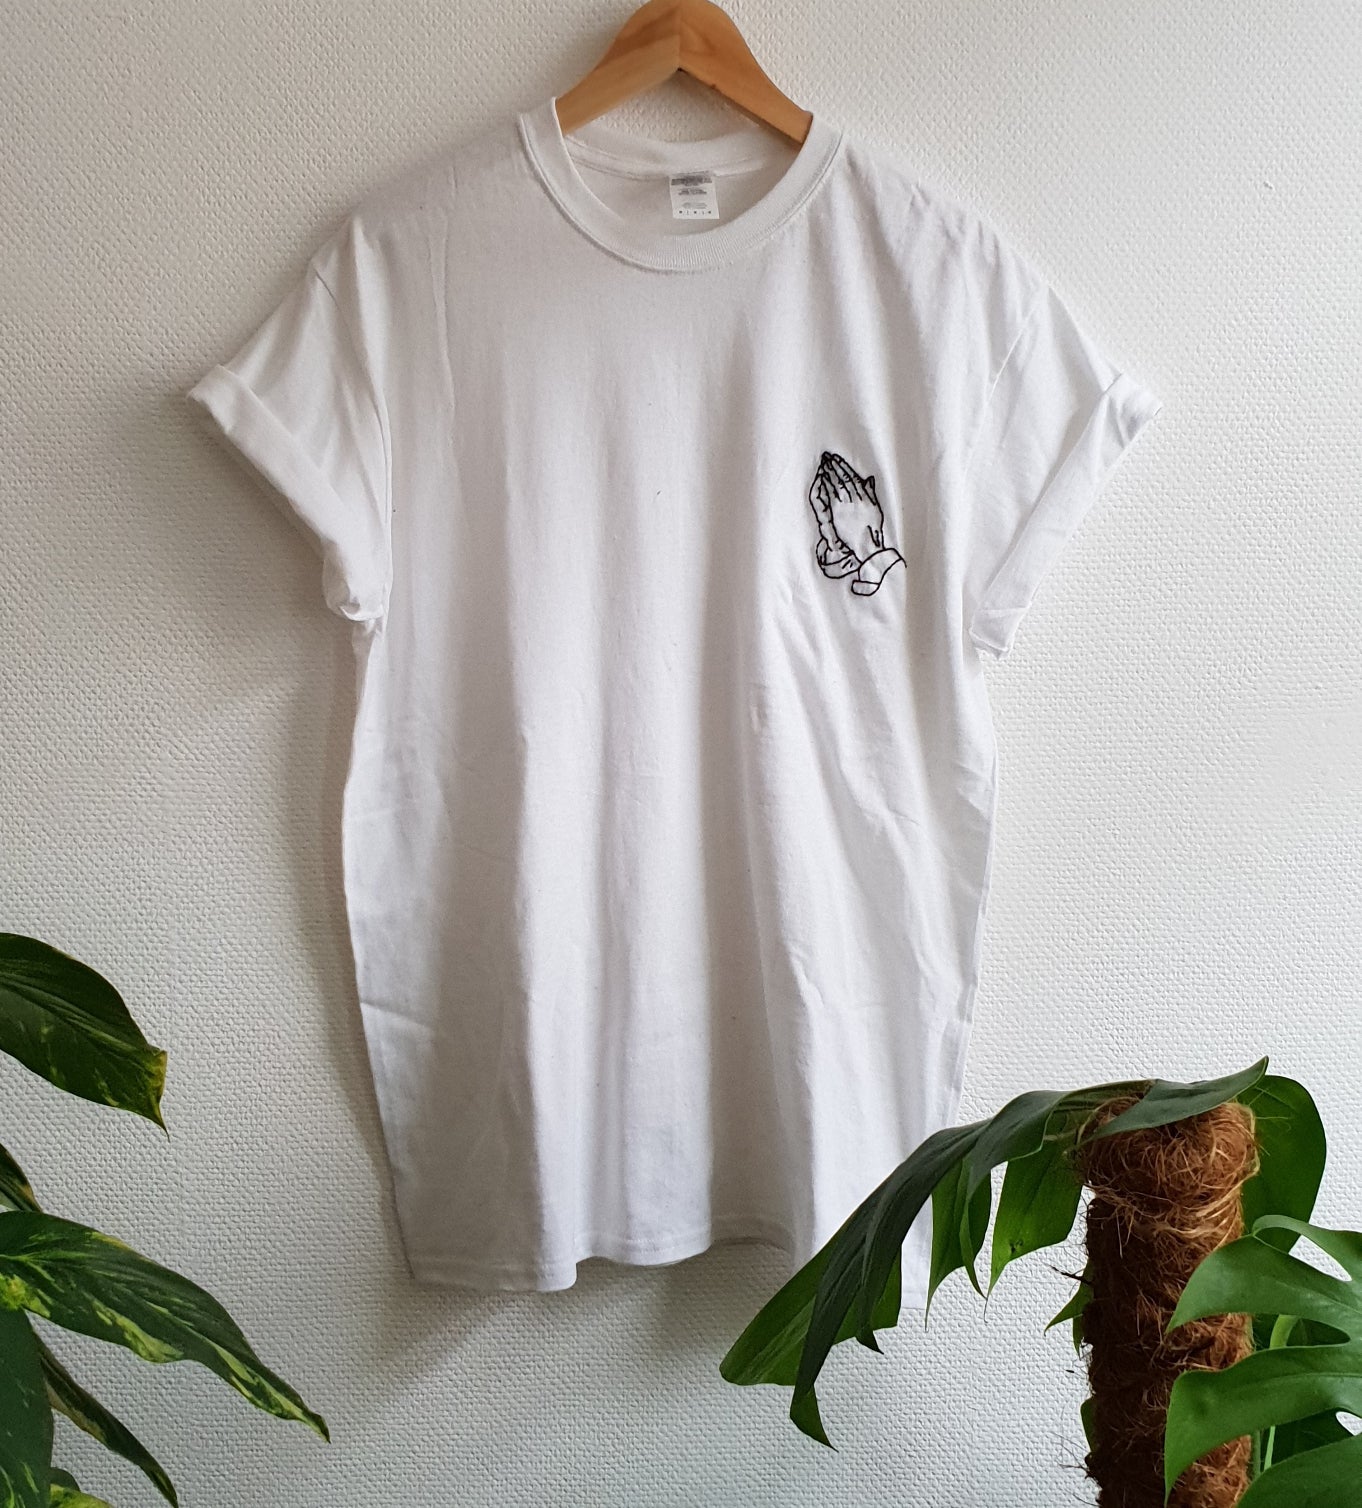 Hand Embroidered Praying Hands Shirt -  Spacy Shirts